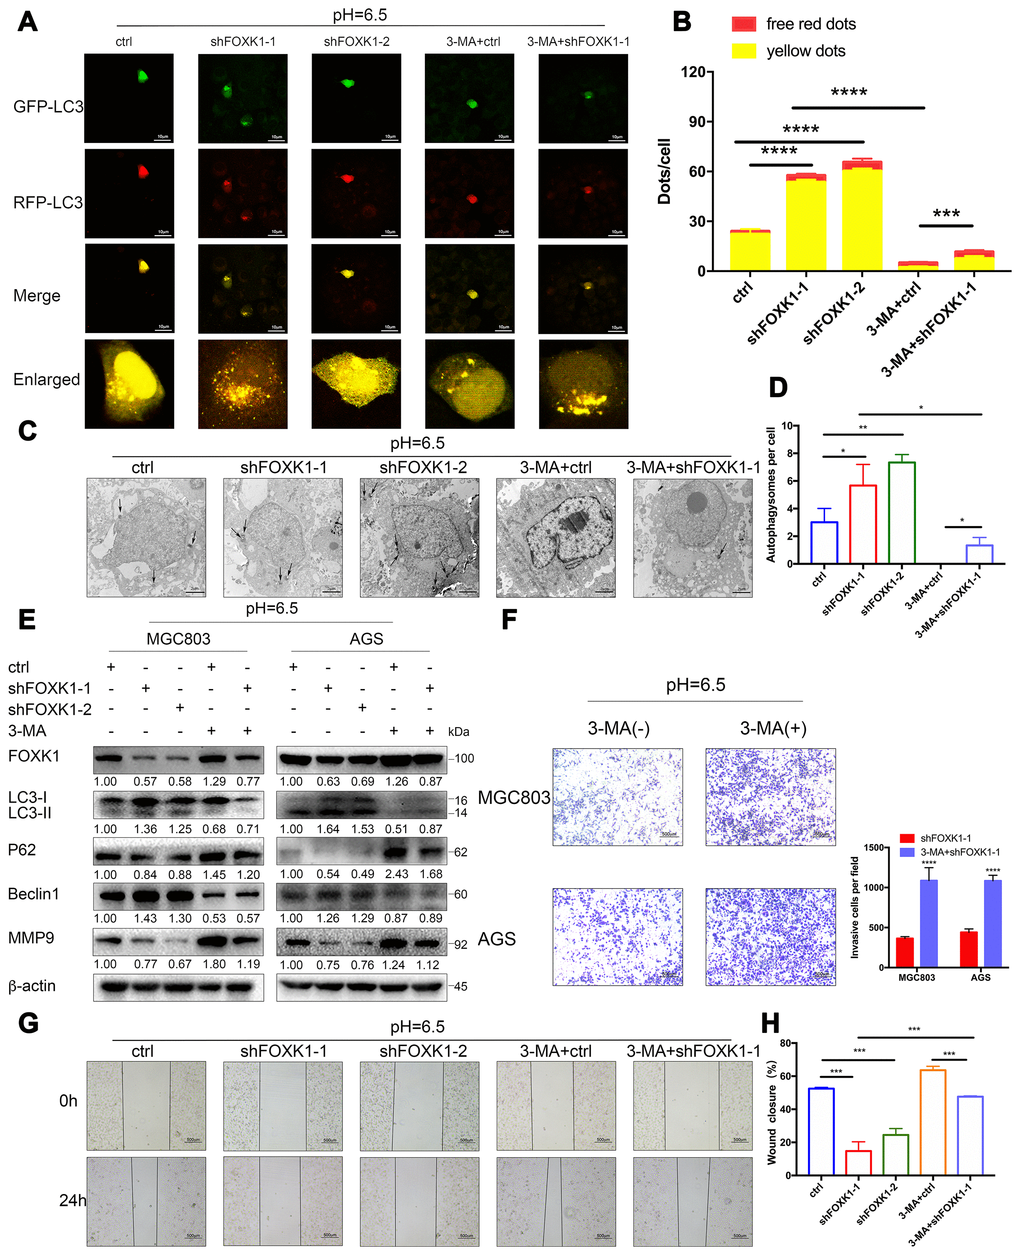 The silencing of FOXK1 induces autophagy to inhibit the migration and invasion of acidic GC cells. (A–H) Acidic MGC803 and AGS cells were infected with an empty lentivirus control (LV-ctrl) or with LV shFOXK1-1 or shFOXK1-2 and subsequently incubated for 24 h prior to pretreatment with 2 mM 3-MA or PBS (control). (A, B) Laser confocal microscopy analysis and quantification of transfected MGC803 cells with plasmid constructs containing LC3, which was fused with tandem mRFP-GFP tags. Scale bar, 10 μm. (C, D) The number of autophagosomes was observed and quantified under a transmission electron microscope. Scale bar, 2 μm. (E) Western blotting analysis of the levels of FOXK1, LC3-I, LC3-II, P62, Beclin1 and MMP9; β-actin was used as a loading control. (F) Matrigel cell invasion assays of MGC803 and AGS cells were performed, and the invading cells were quantified. (G, H) Scratch test evaluation of MGC803 cells. The wound healing area was analyzed using ImageJ software. Scale bar, 500 μm. The data are presented as the means ± S.D.s from three independent experiments. * P 